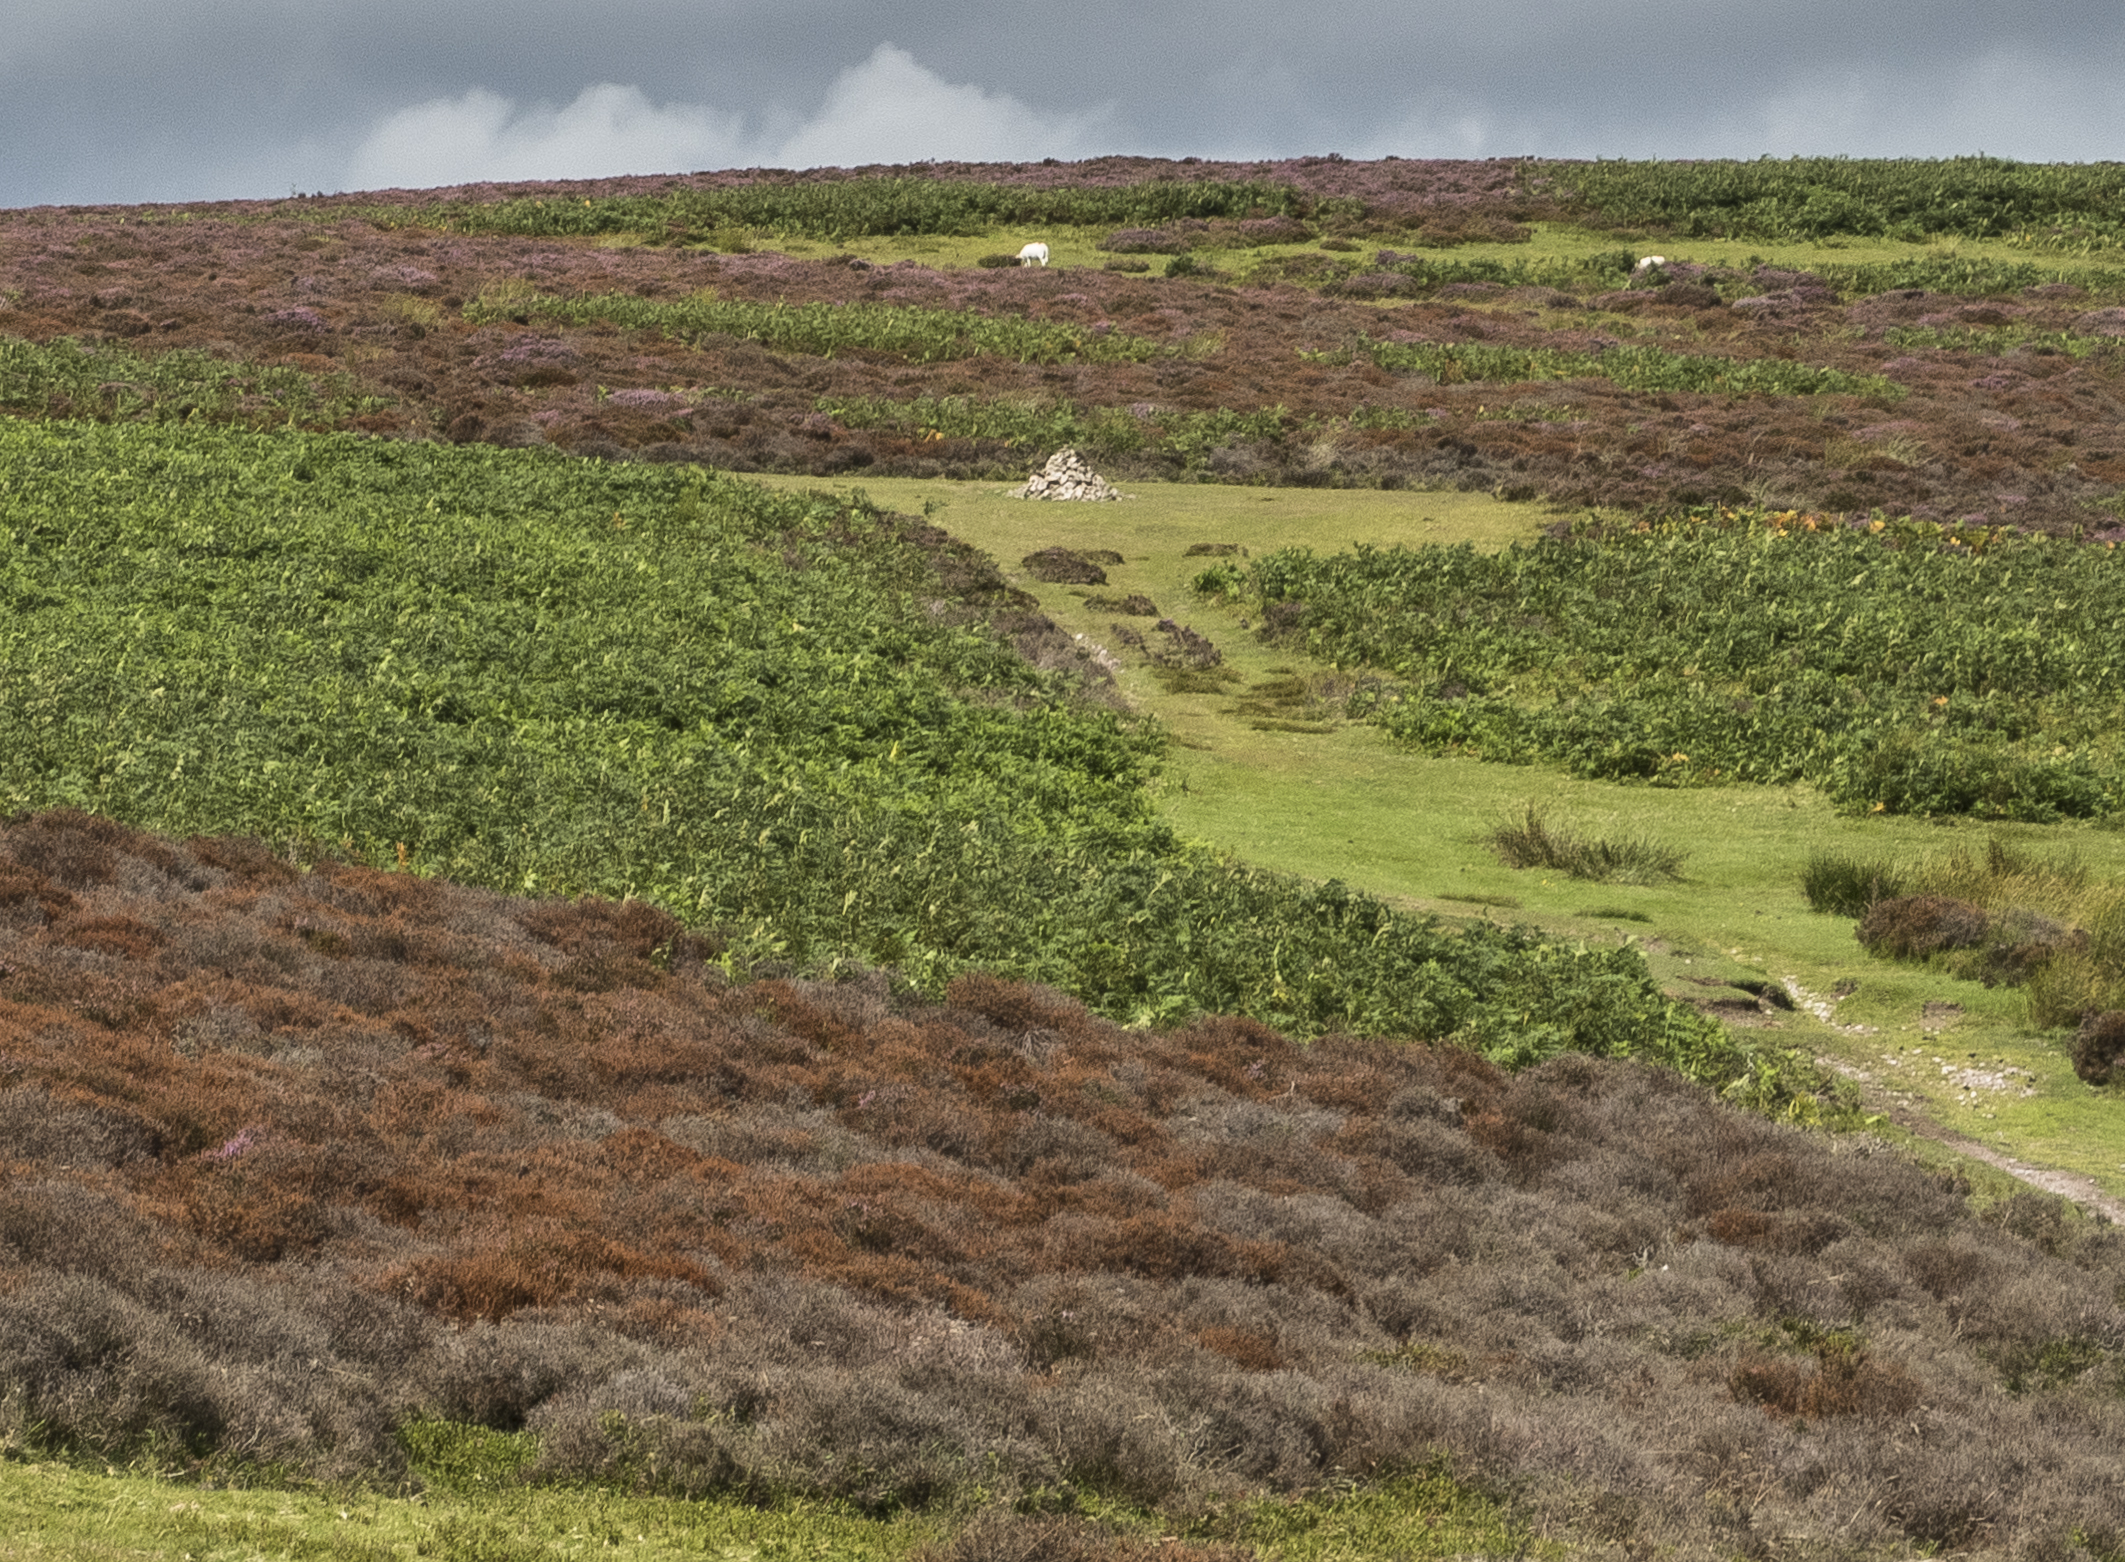 This year, much of the heather is brown (PJ Howsam/National Trust/PA)